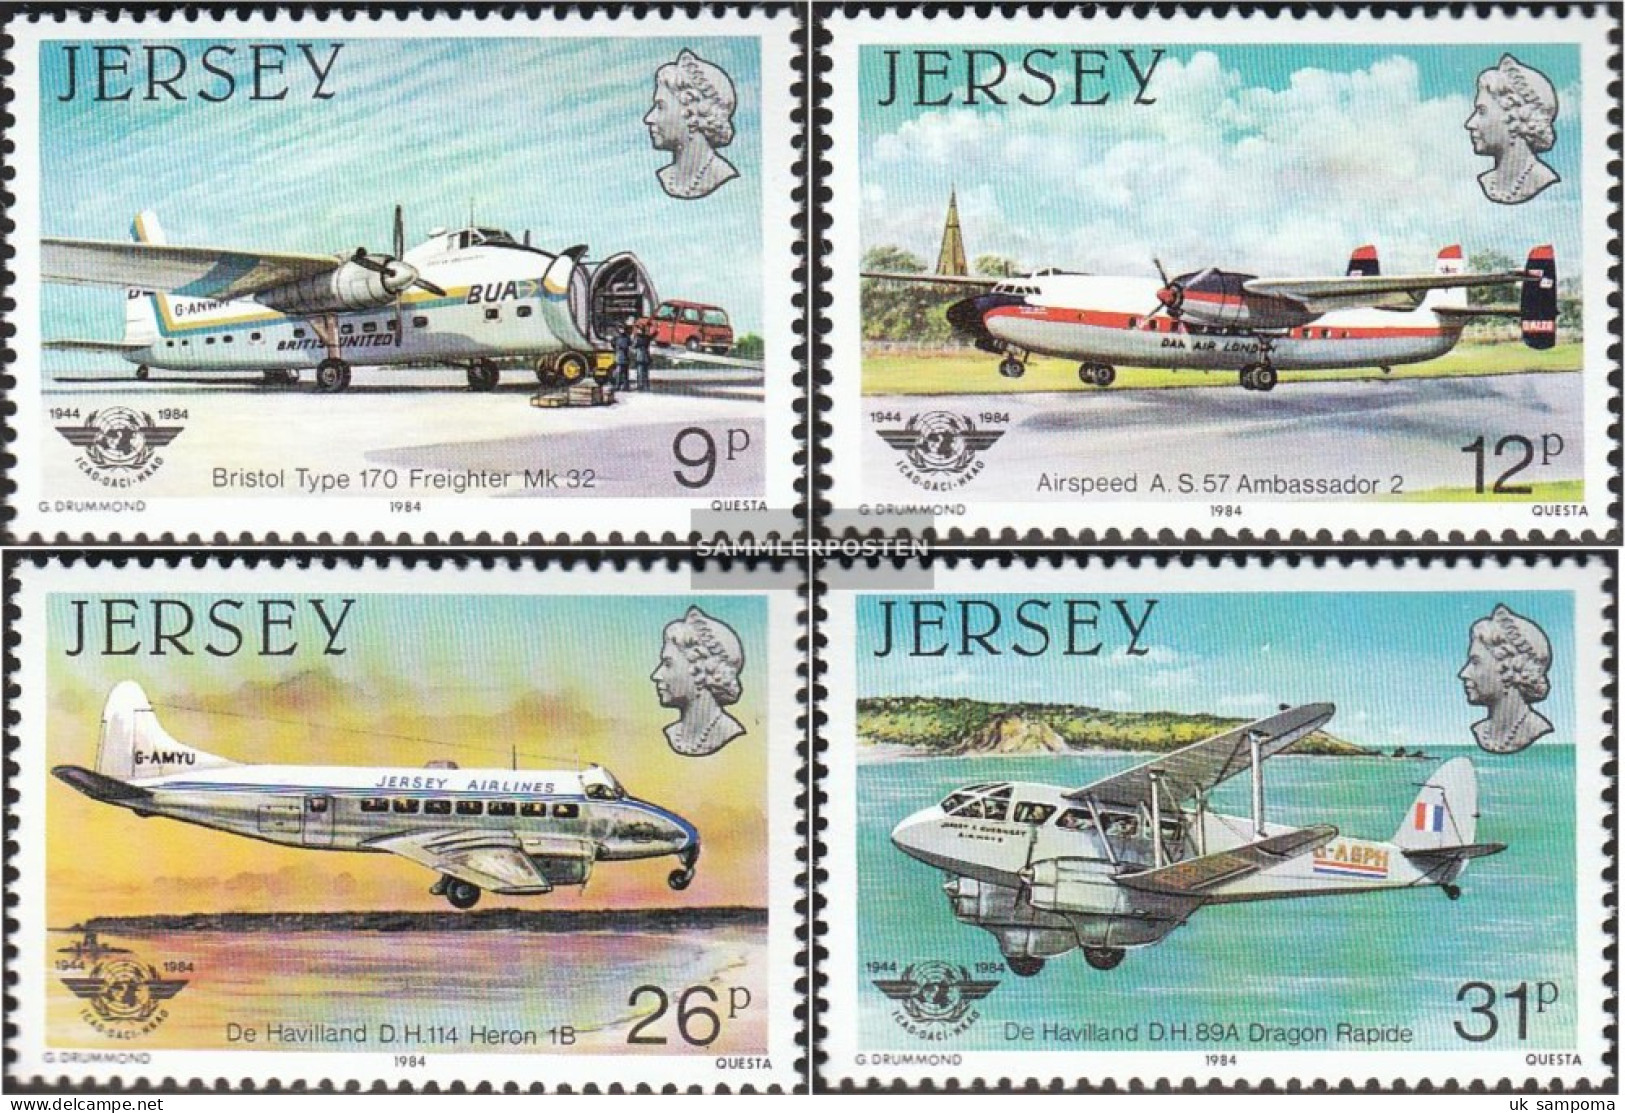 United Kingdom - Jersey 330-333 (complete Issue) Unmounted Mint / Never Hinged 1984 ICAO - Jersey